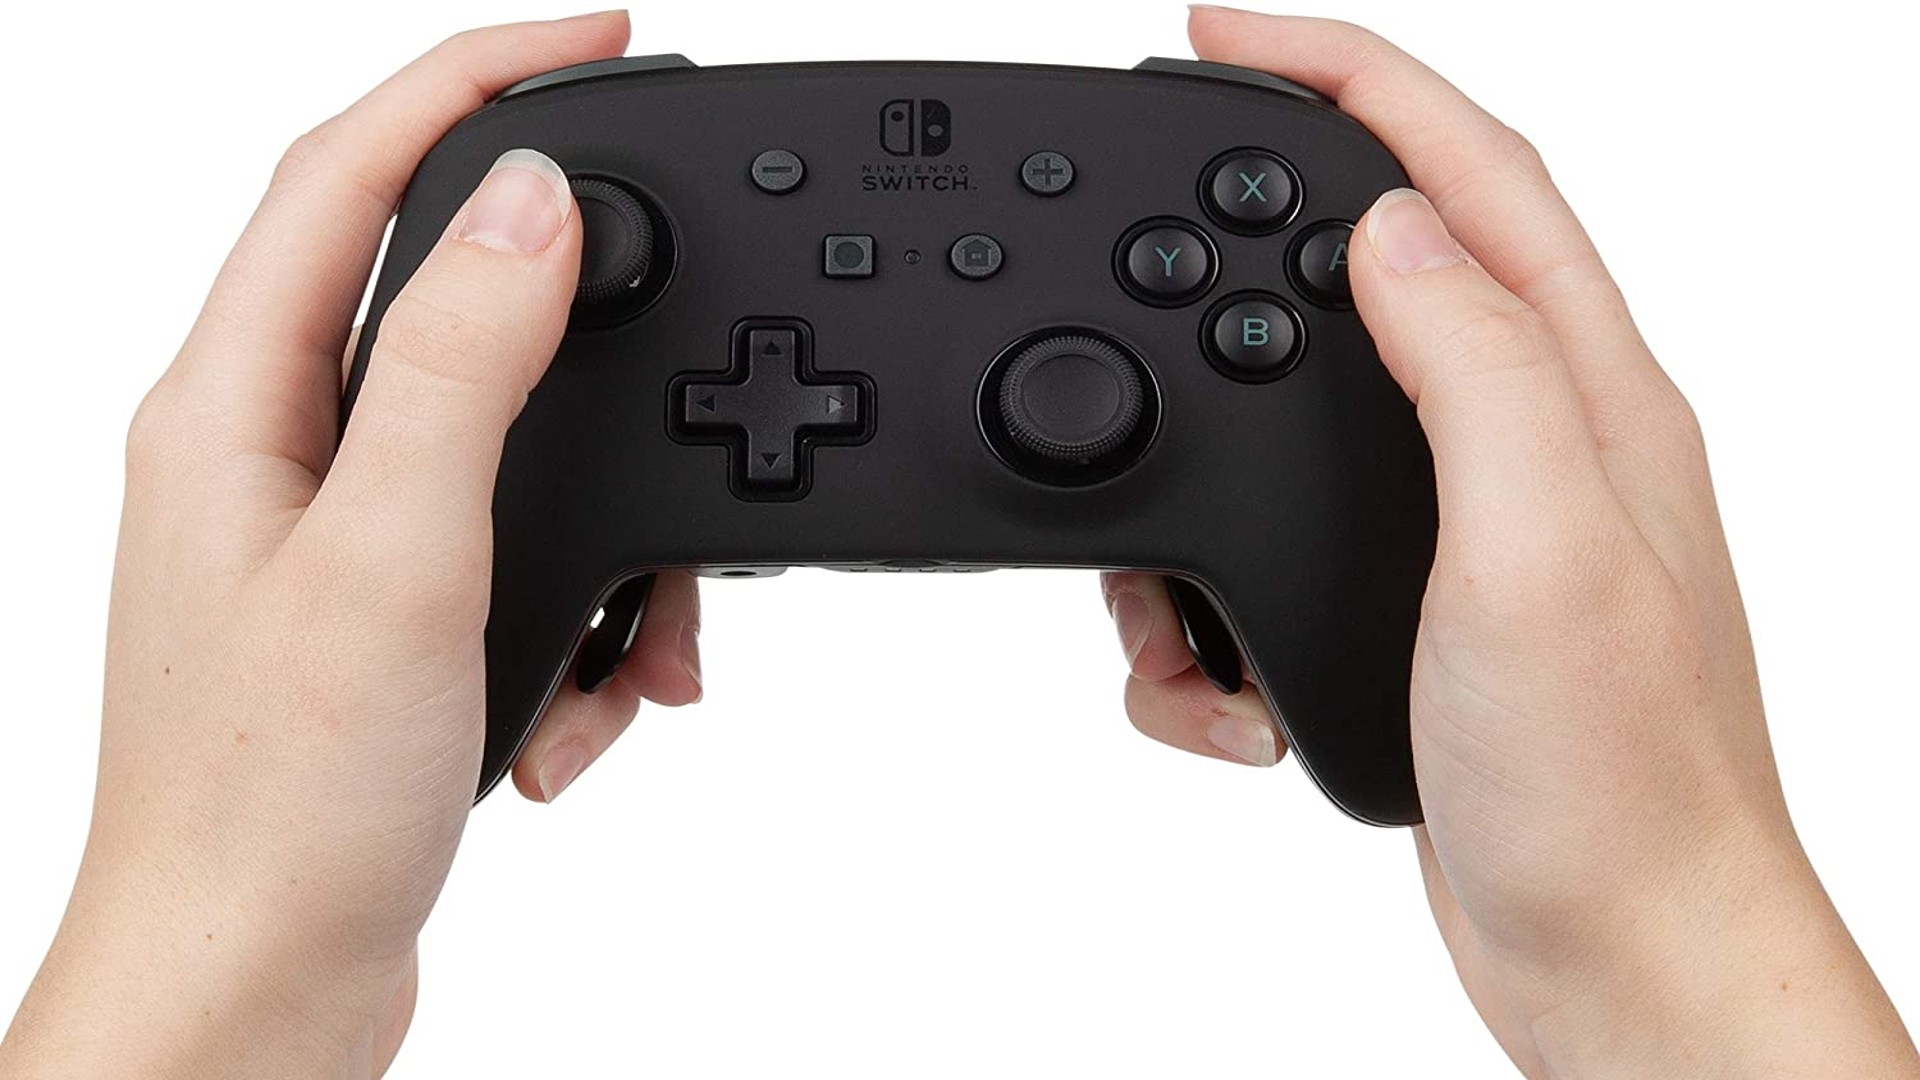 Ditch The Drift And Swap Your Joy-Cons For This Pro Switch Controller, Now With 30% Off thumbnail